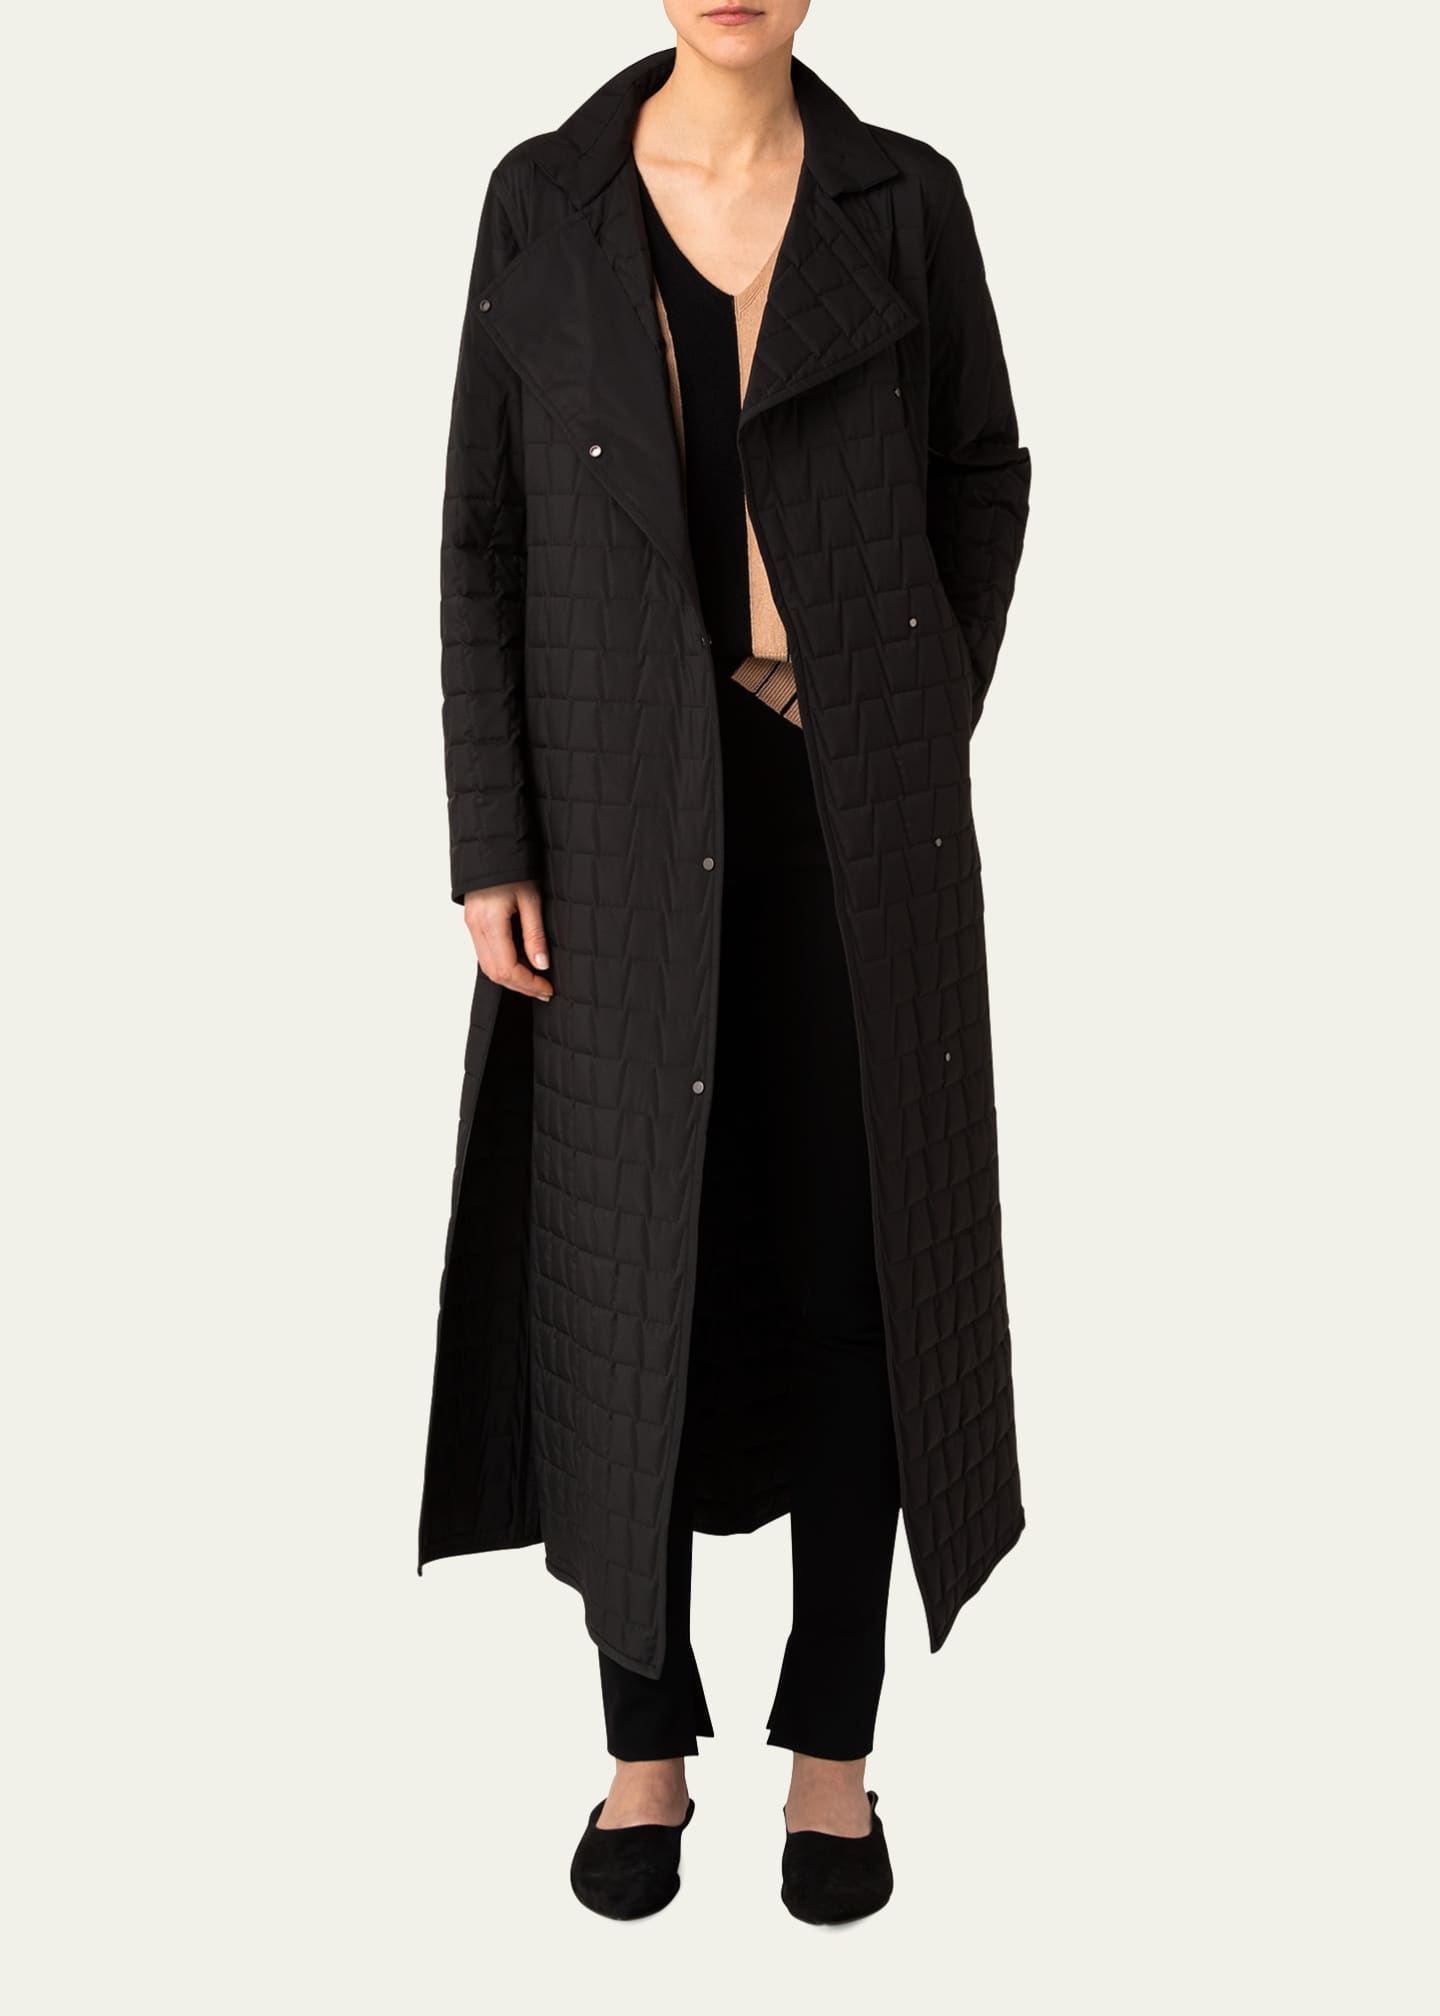 Akris Trapezoid Quilted Long Coat with Belt - Bergdorf Goodman